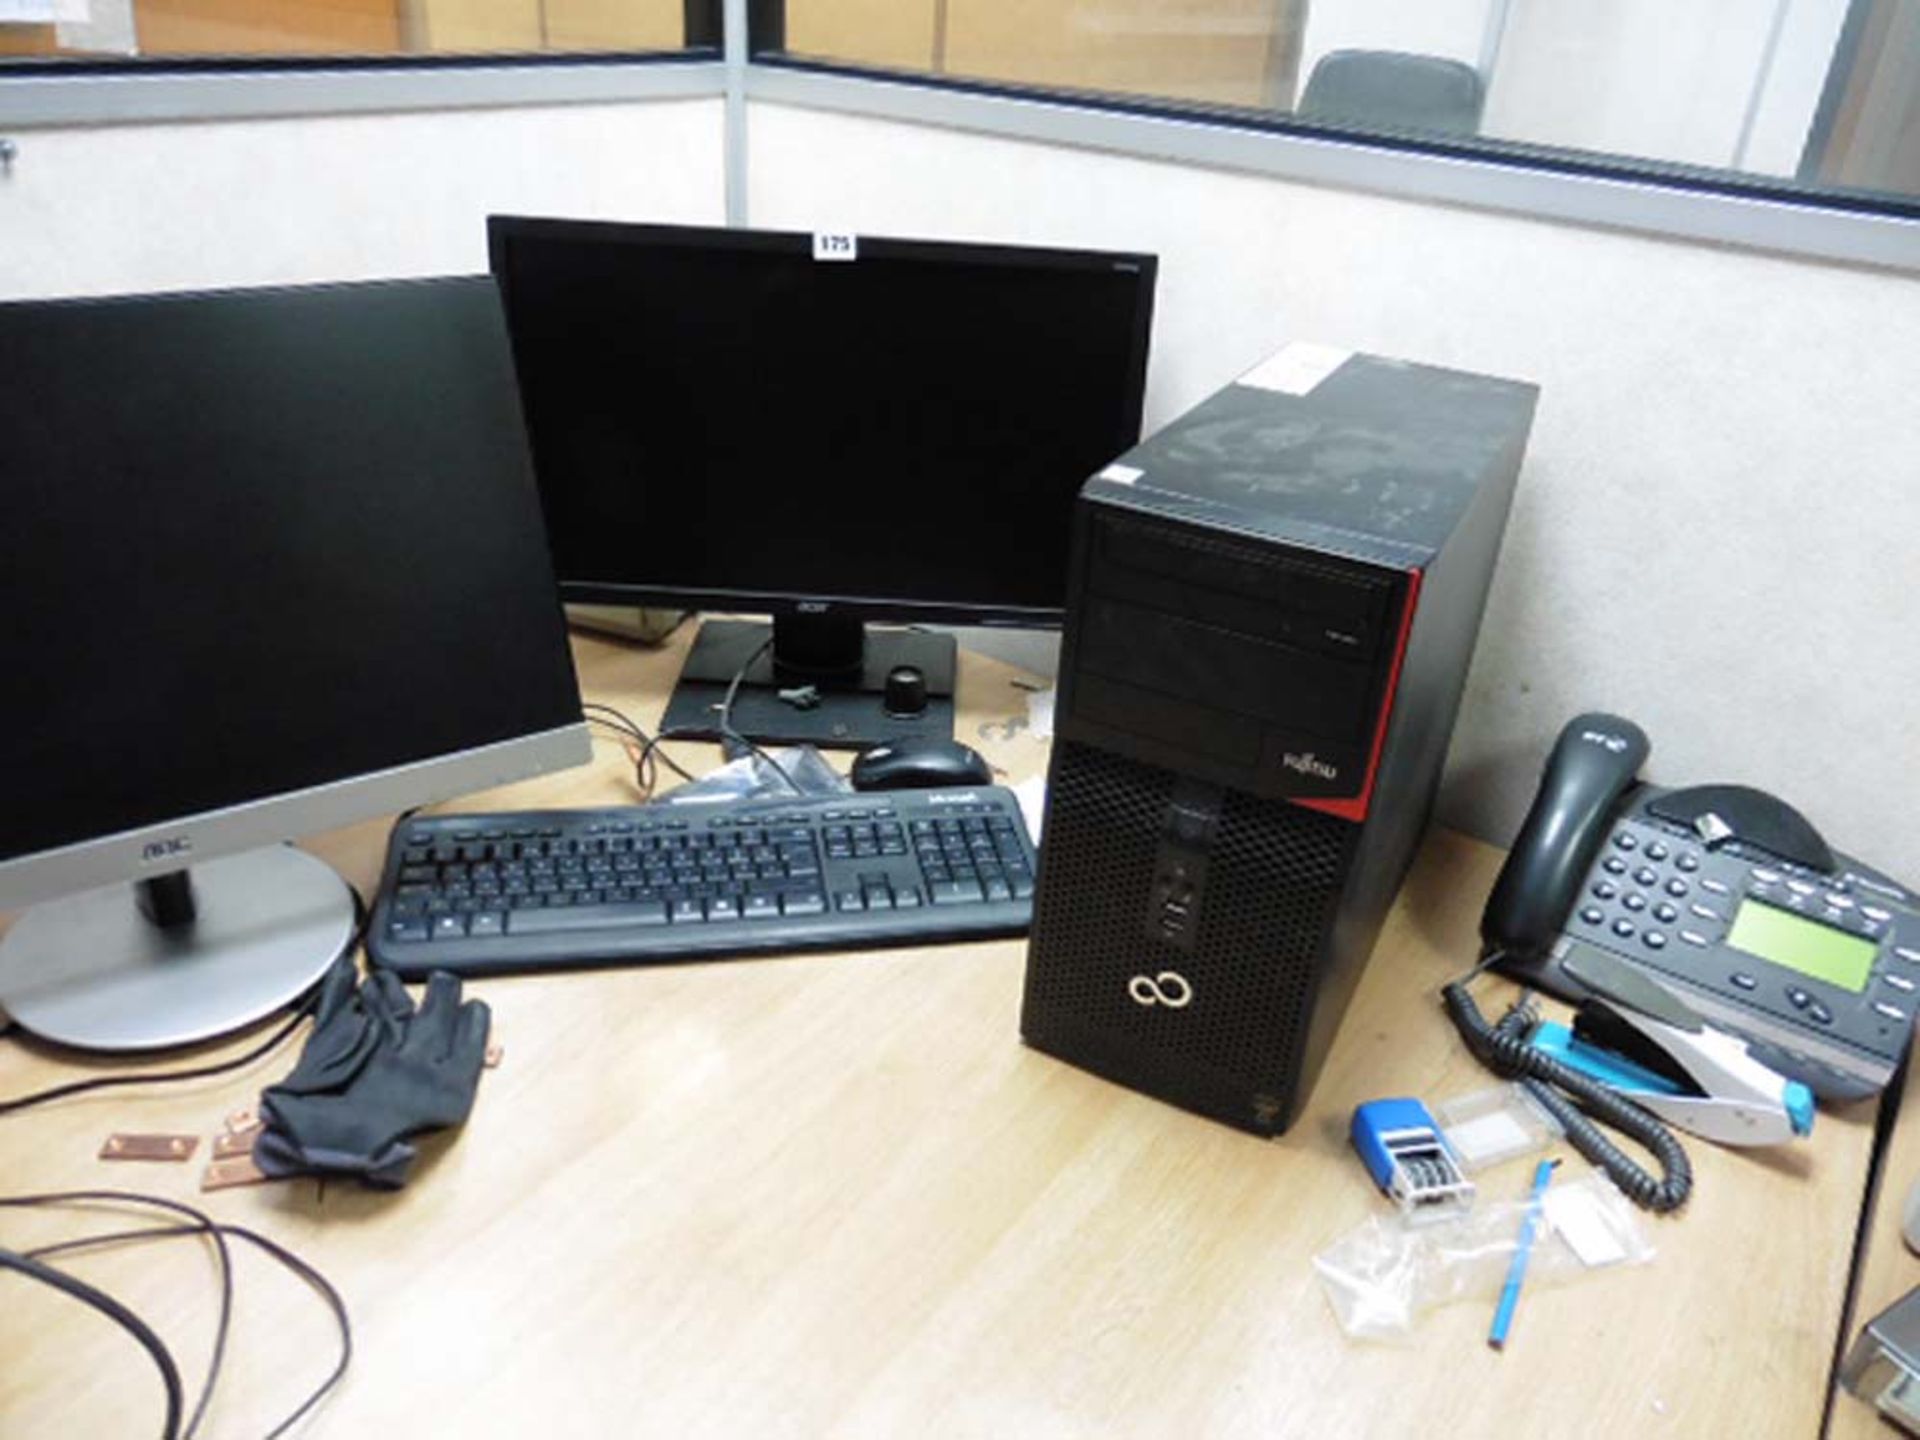 Fujitsu Core i5 tower PC with Acer 22'' & AOC 23'' monitors, mouse, keyboard & HP printer (no HDDs)